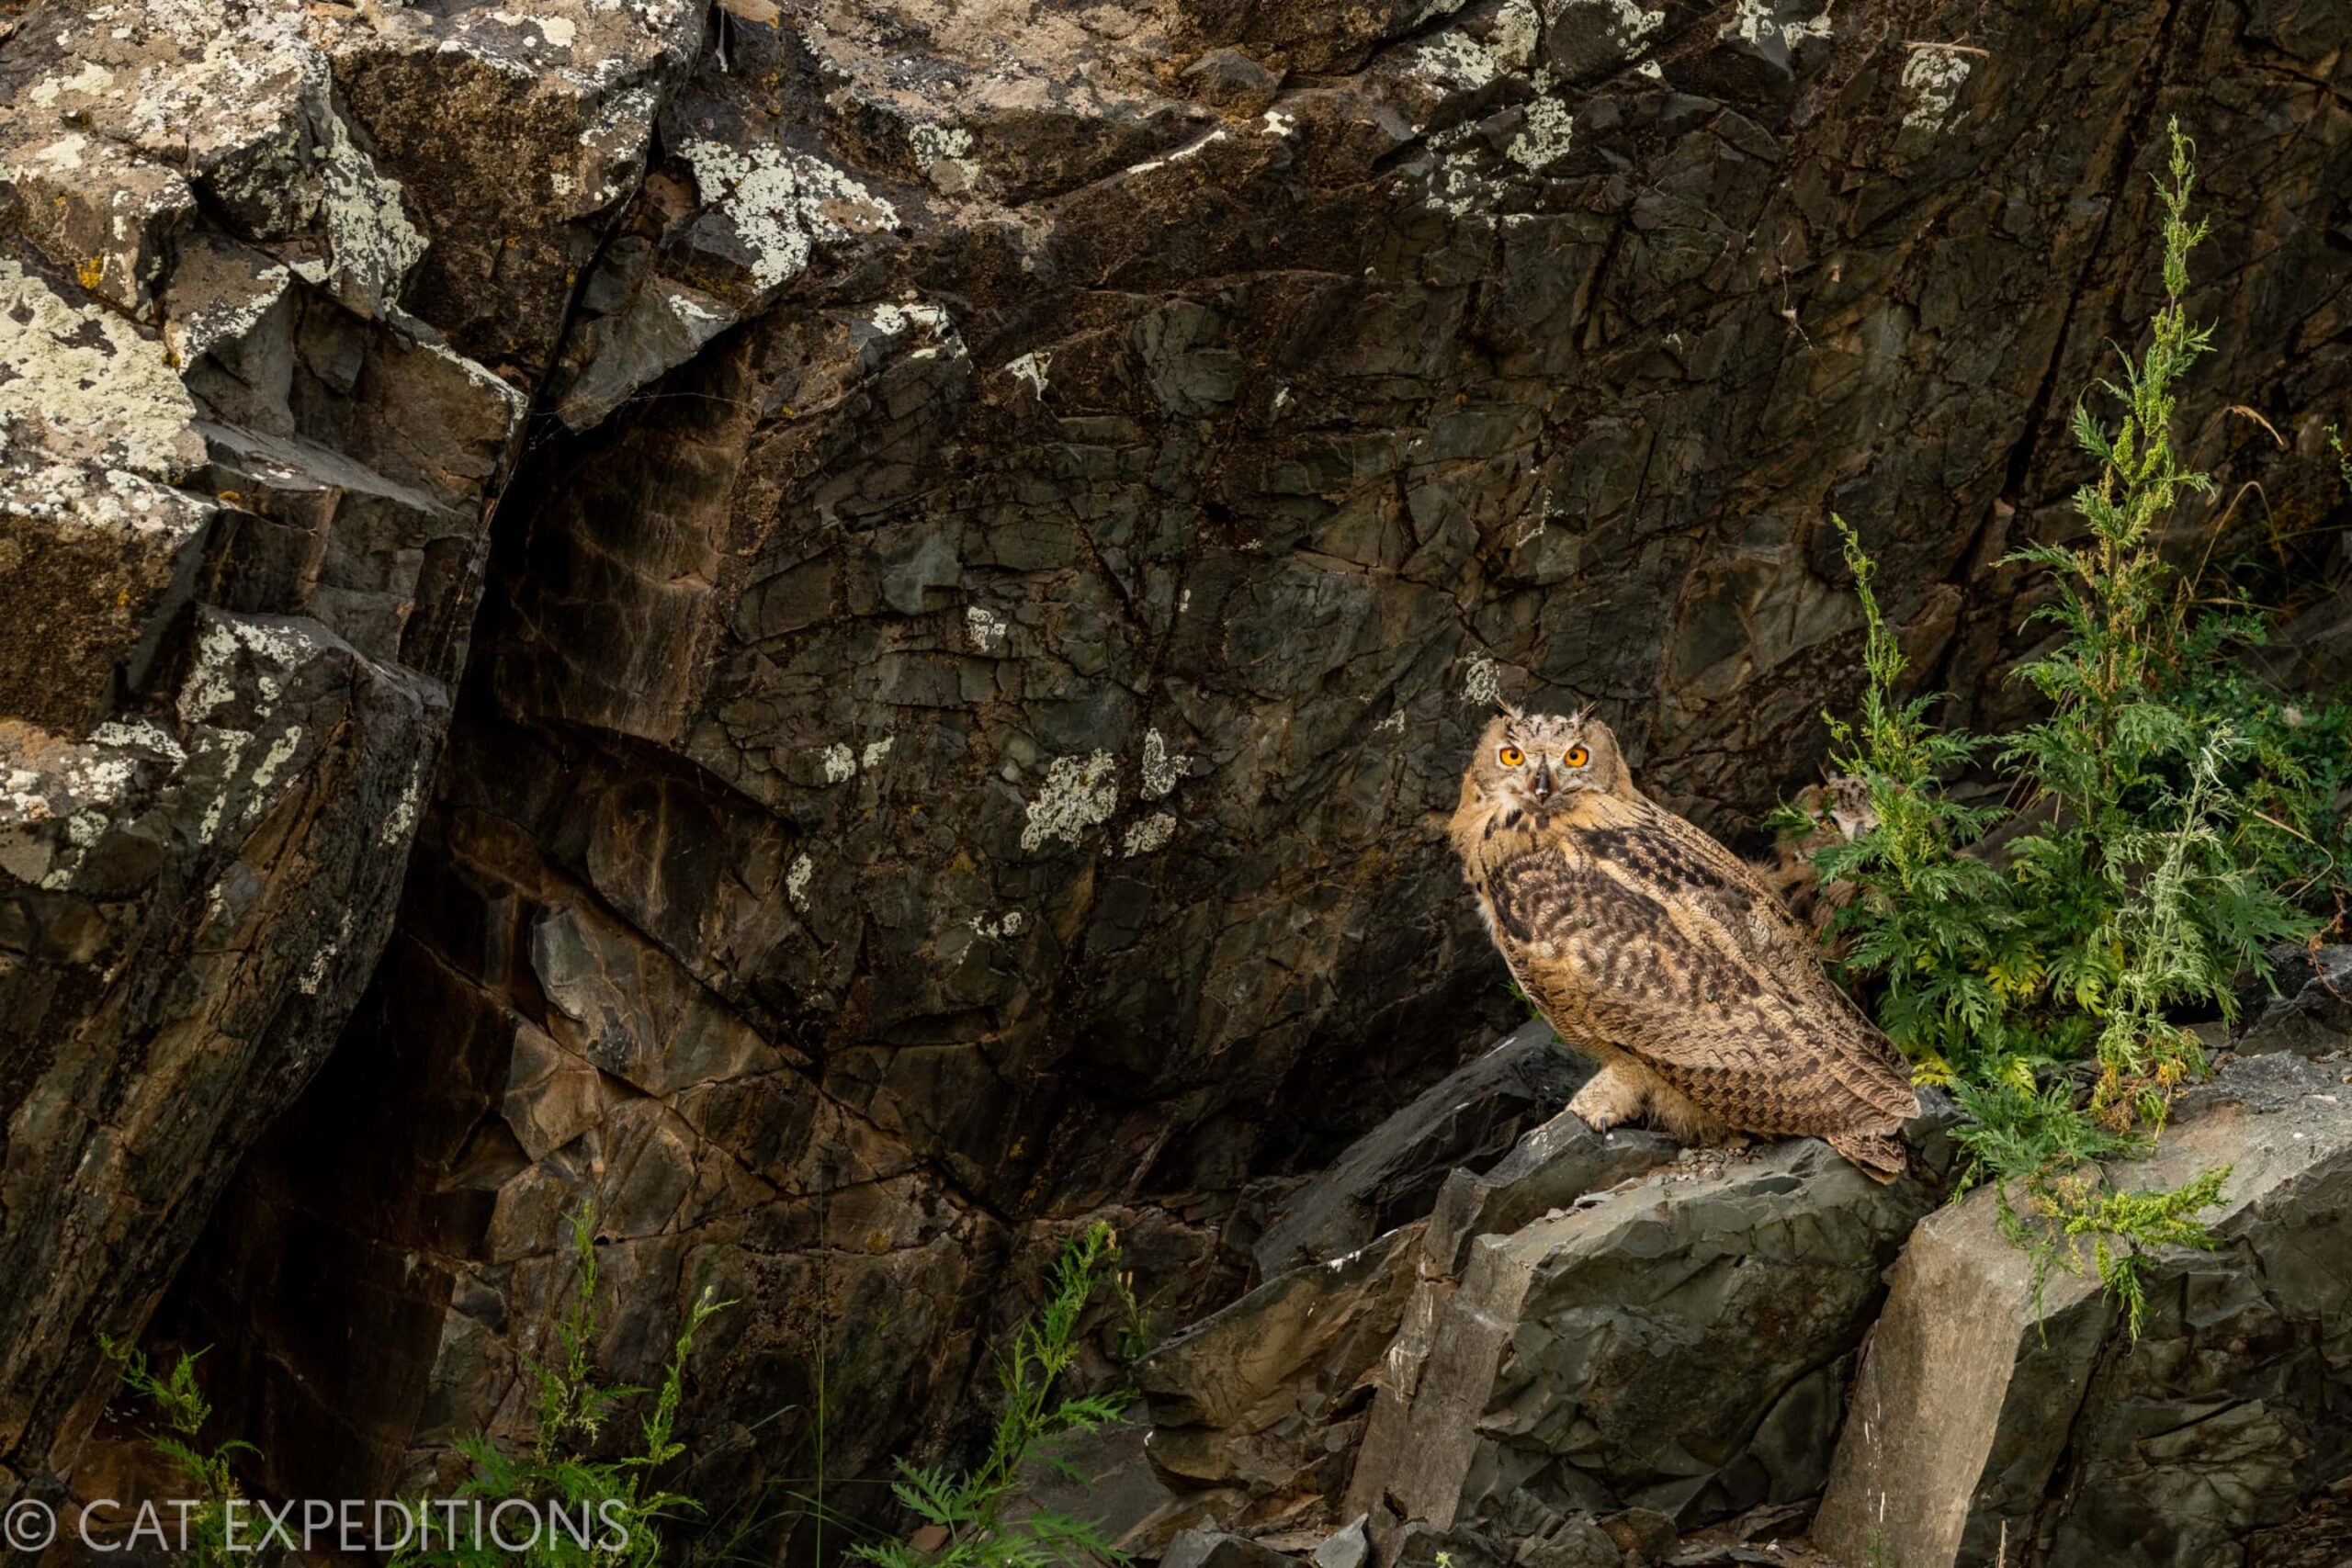 An Eurasian Eagle-Owl (Bubo bubo) fledgling sits on a cliff during our tour in eastern Mongolia